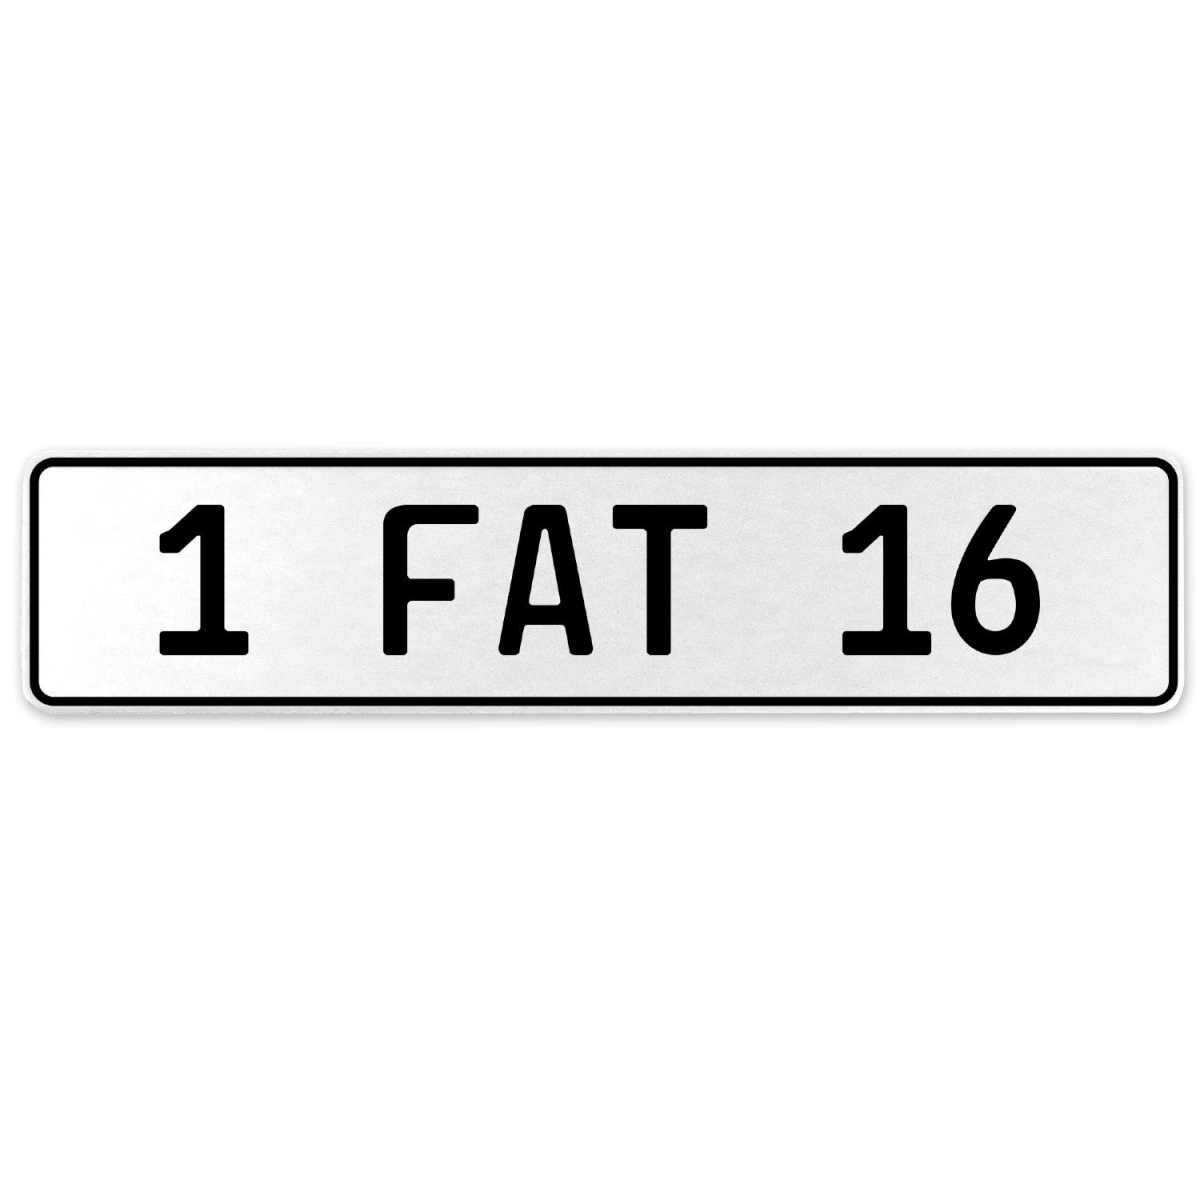 554613 1 Fat 16 - White Aluminum Street Sign Mancave Euro Plate Name Door Sign Wall